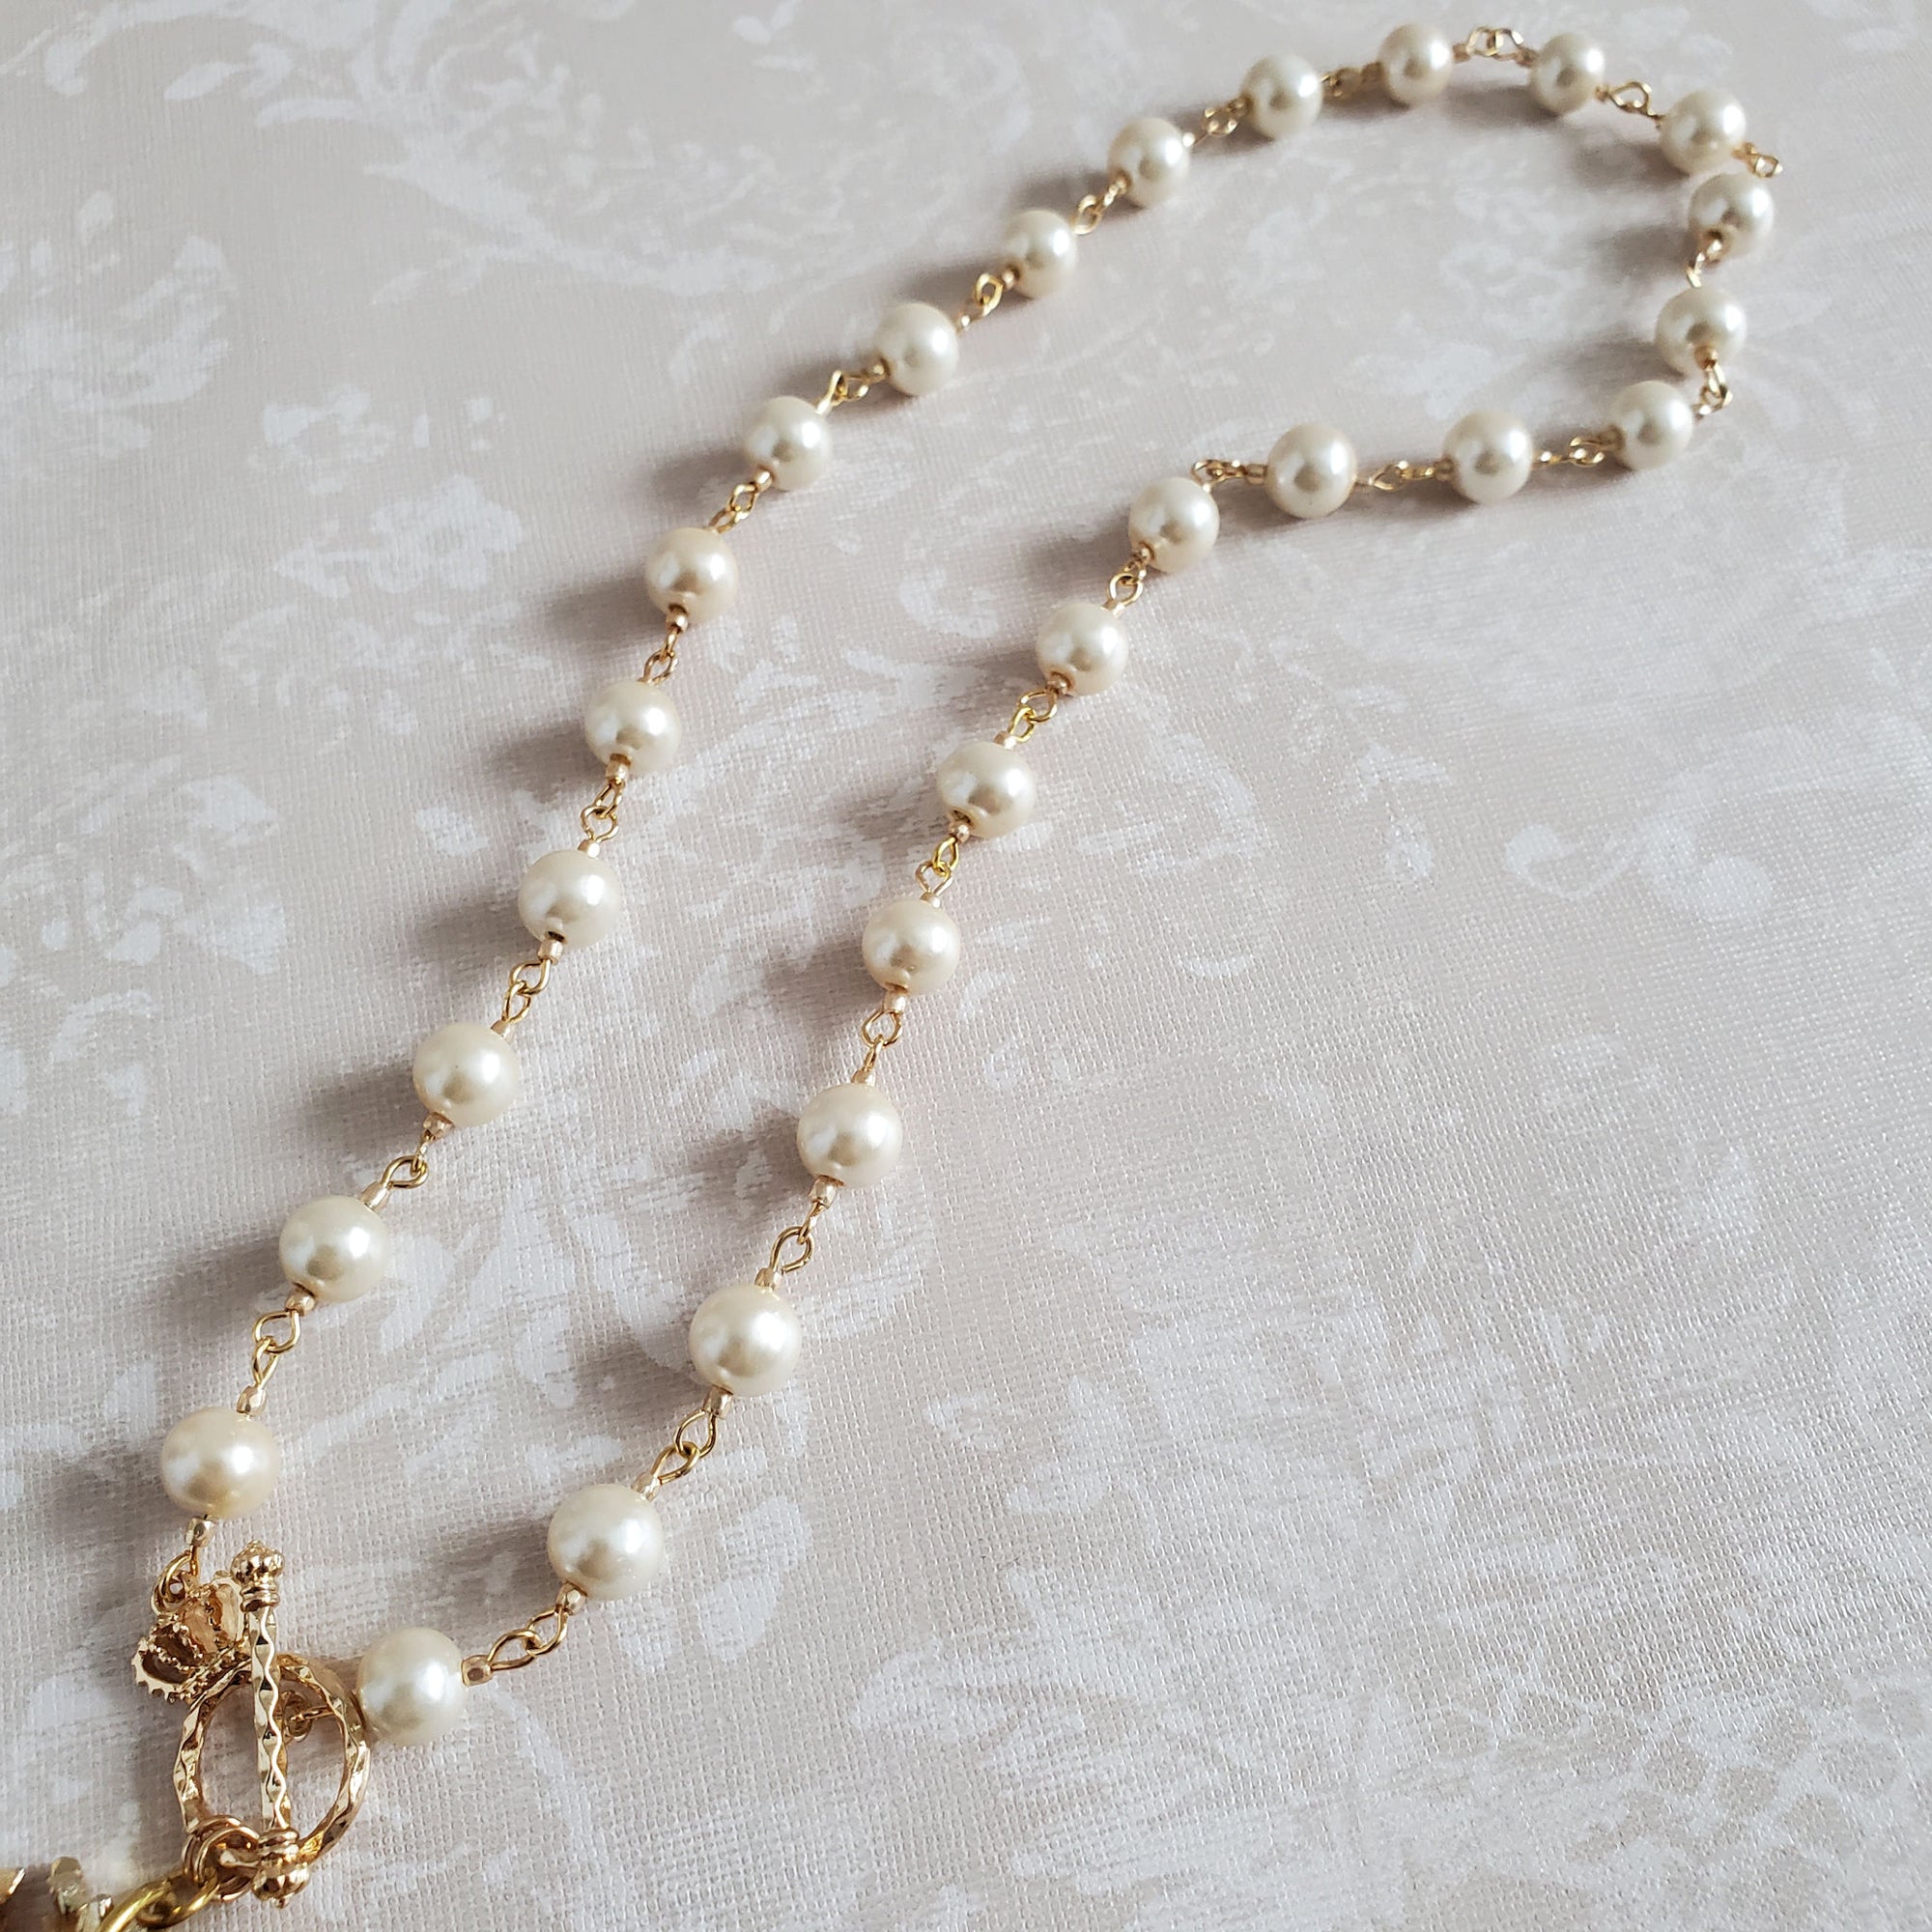 Single strand, vintage ivory faux pearl necklace with gold accent beads